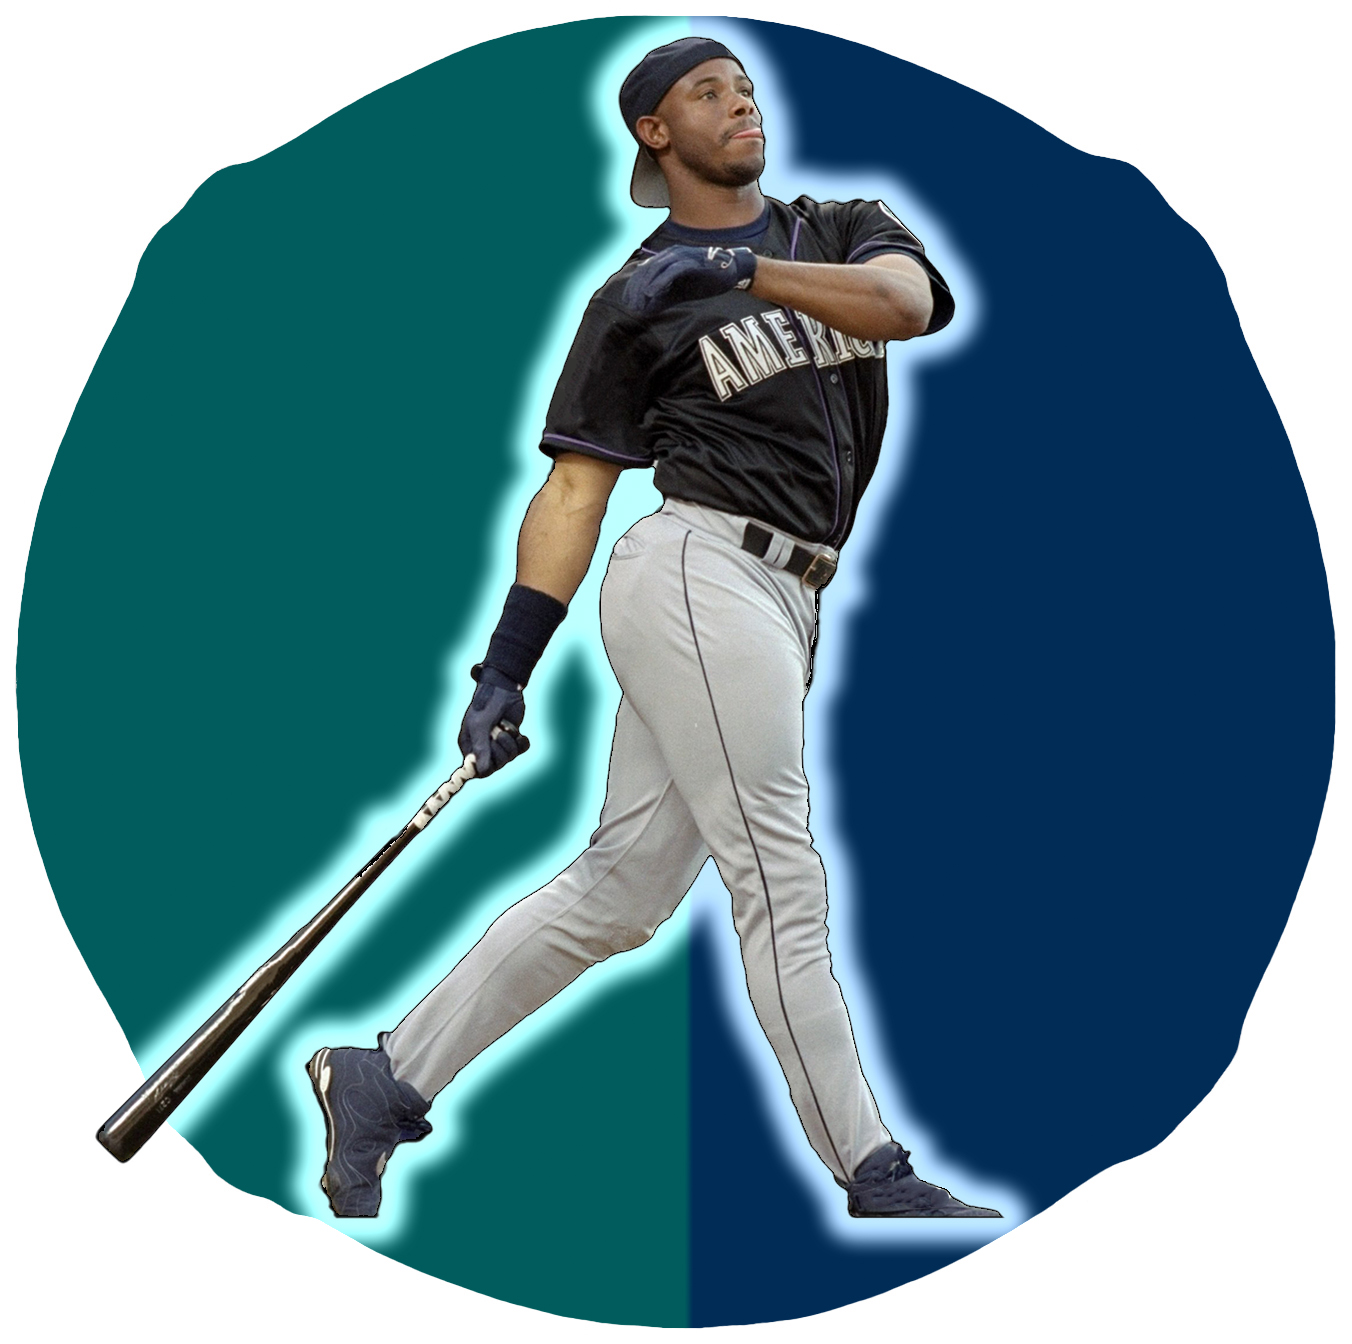 Mill Creek Sports on X: Ken Griffey Jr. private autograph signing